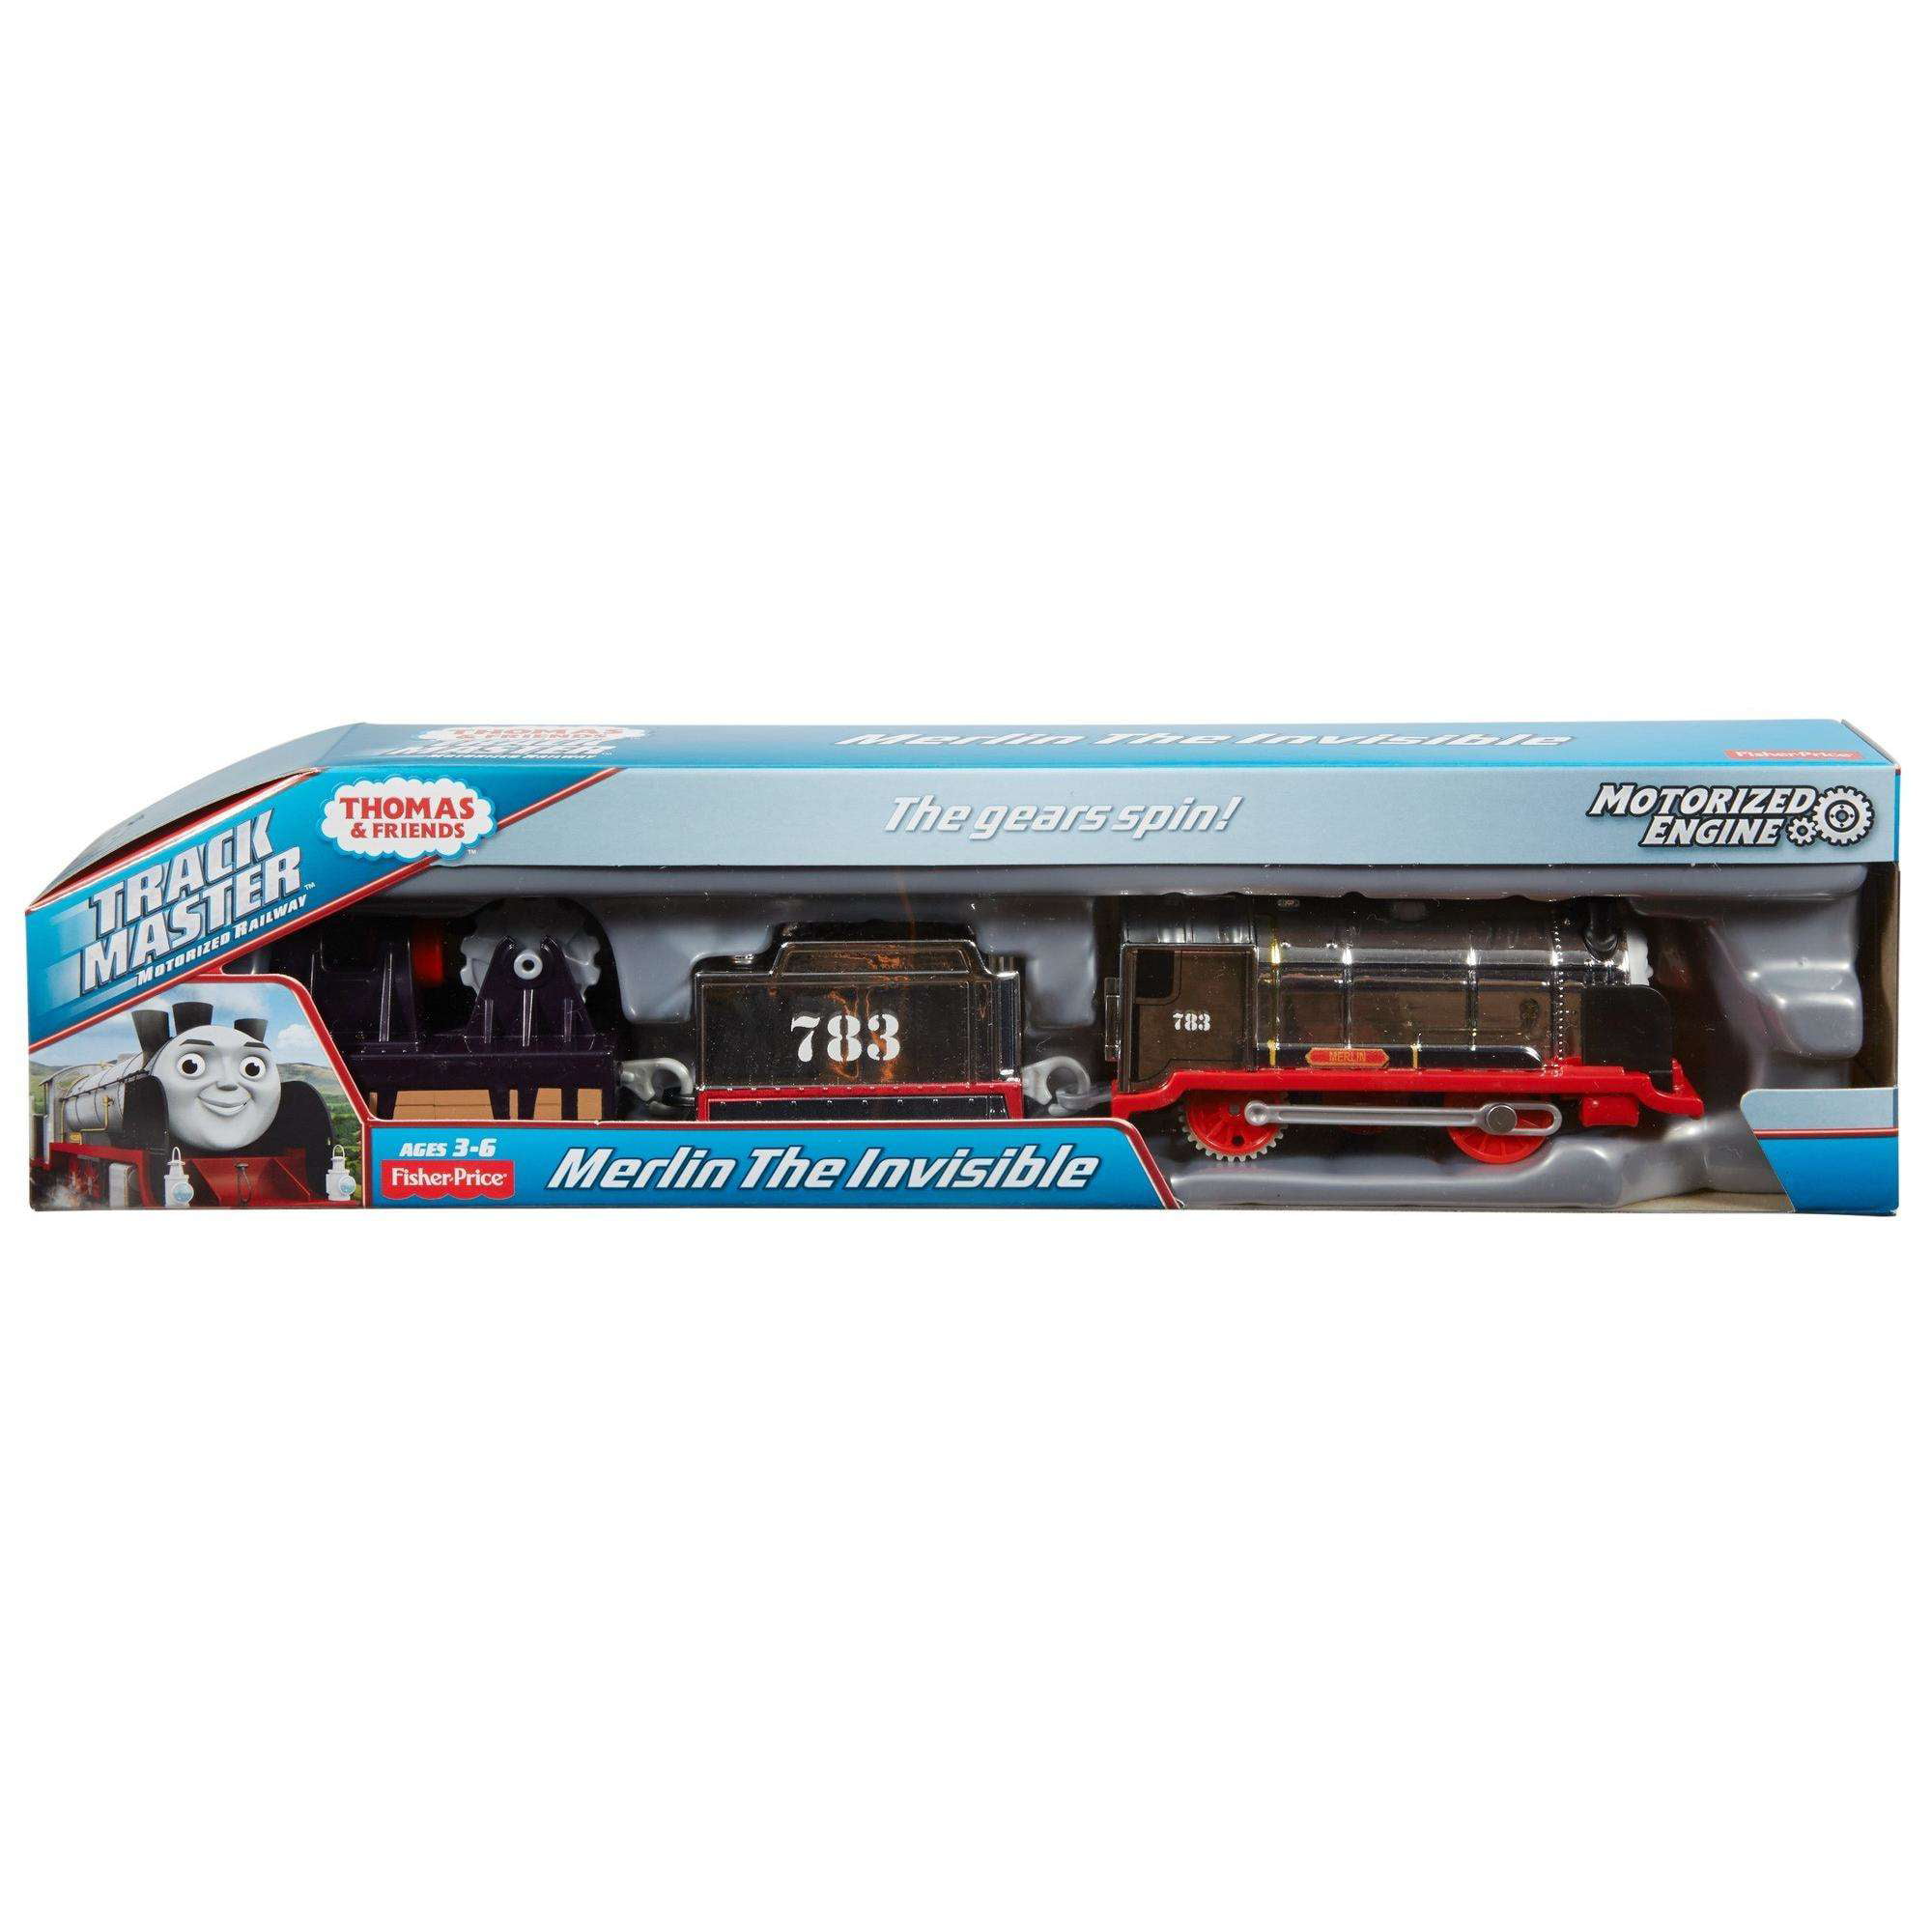 Motorized Railway Merlin the Invisible Train Fisher-Price Thomas & Friends TrackMaster